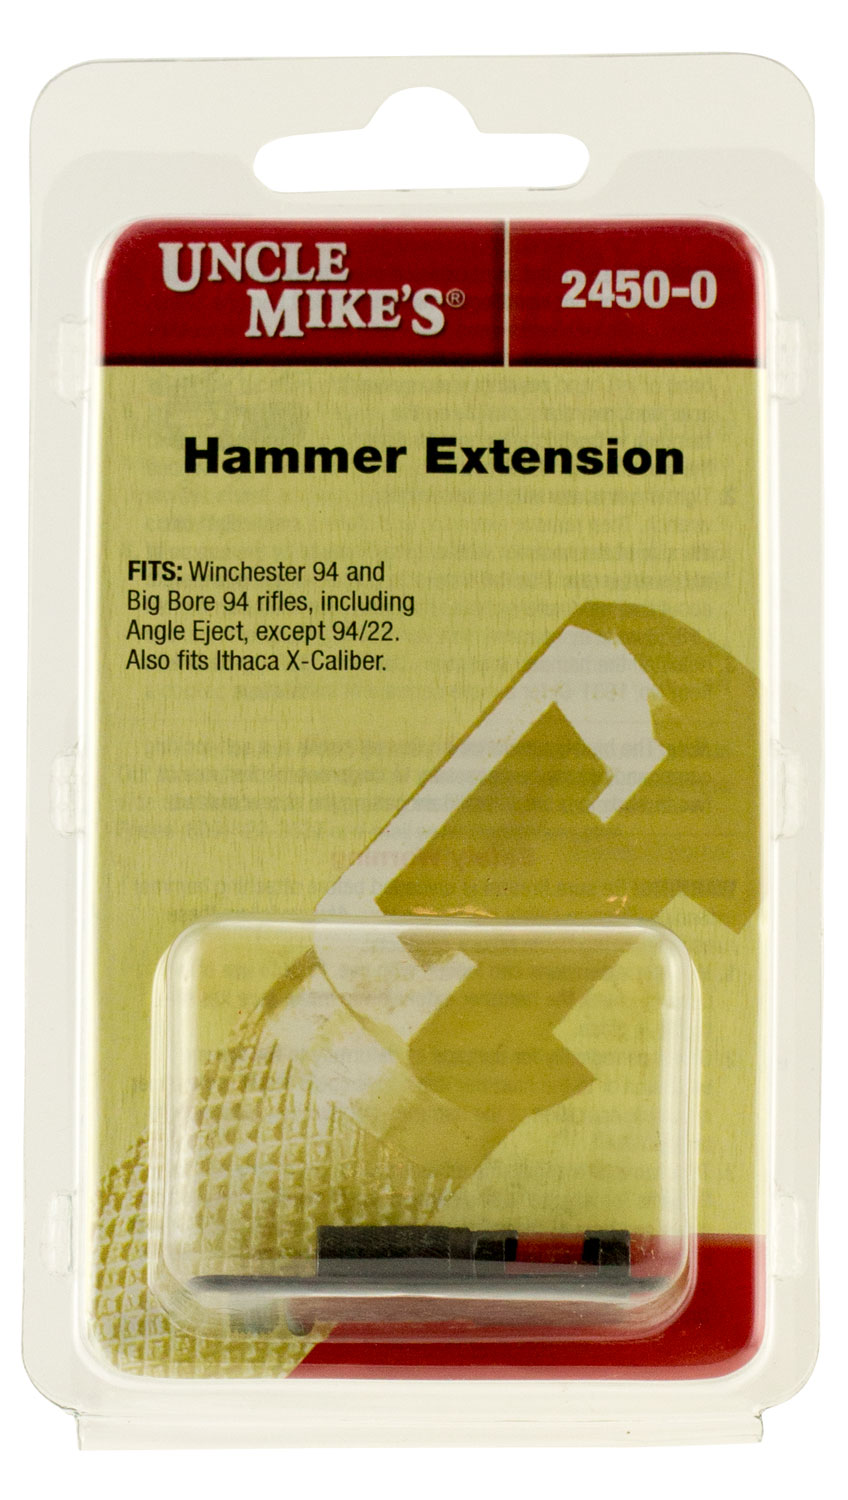 MICHAELS HAMMER EXTENSION FOR MARLIN (1956-1982 MANUFACTURE)